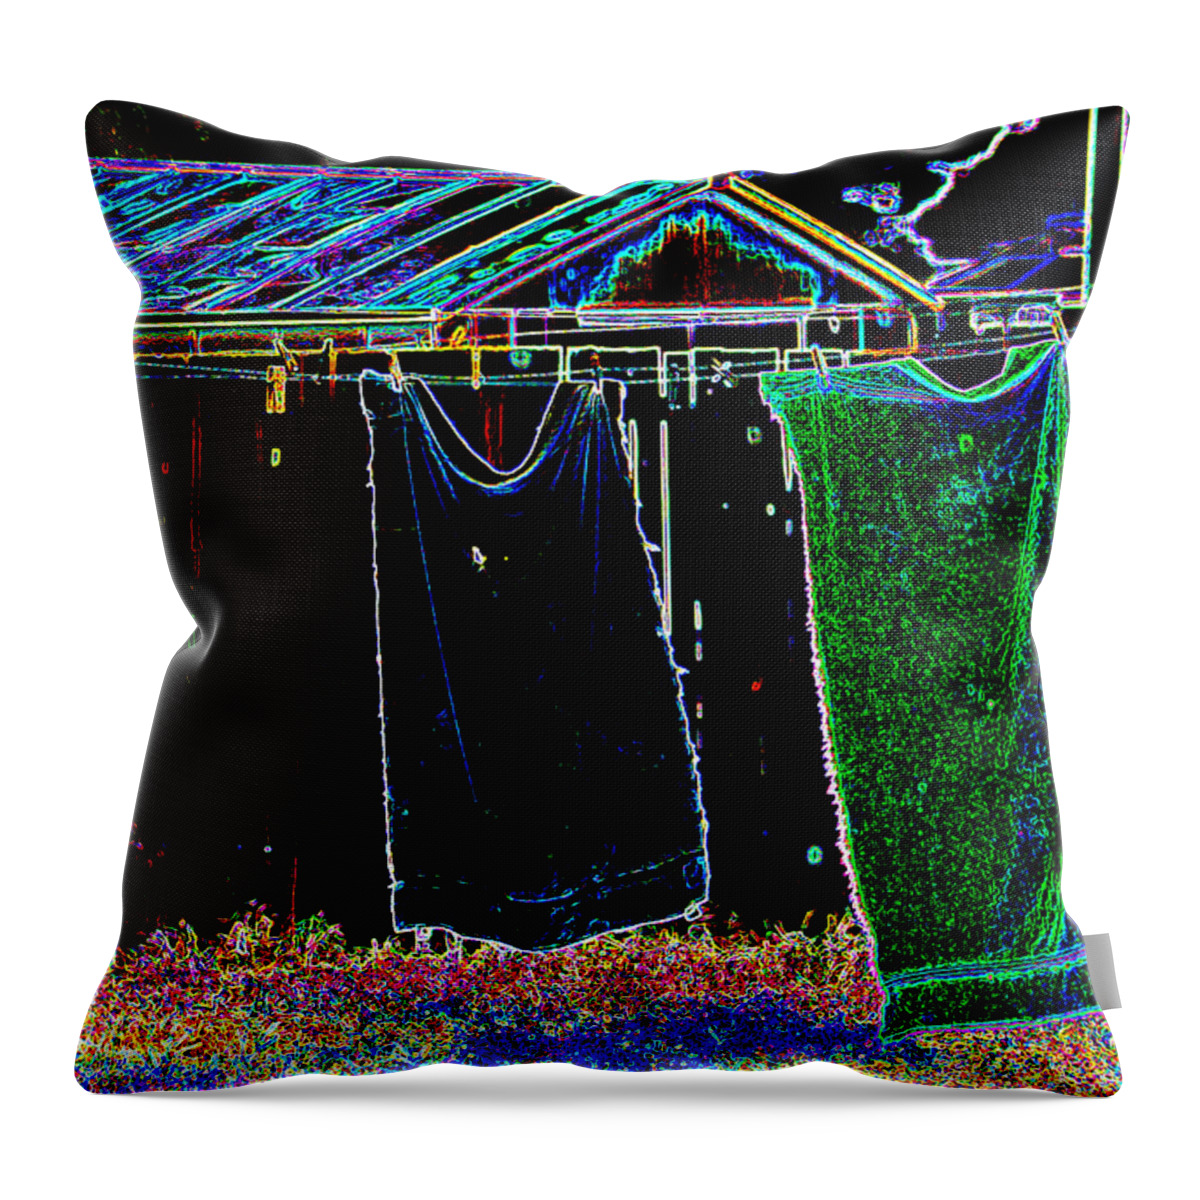 Towels Throw Pillow featuring the photograph The Back Yard by Charles Benavidez